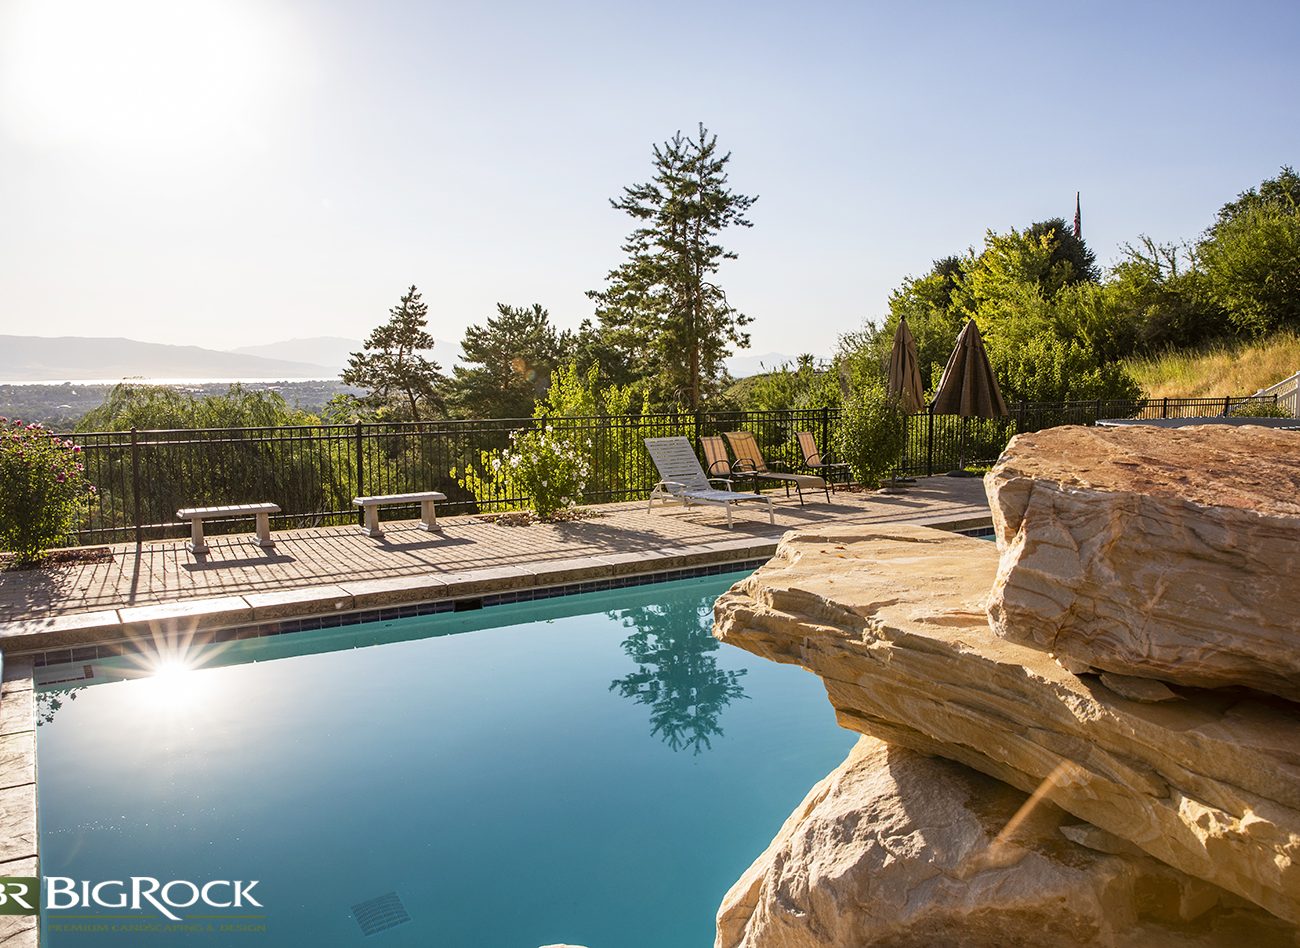 Pool installation is only one aspect to ensuring your backyard pool is not only functional but also beautiful. Pool installation and landscaping design go hand in hand and Big Rock Landscaping can build both for you.